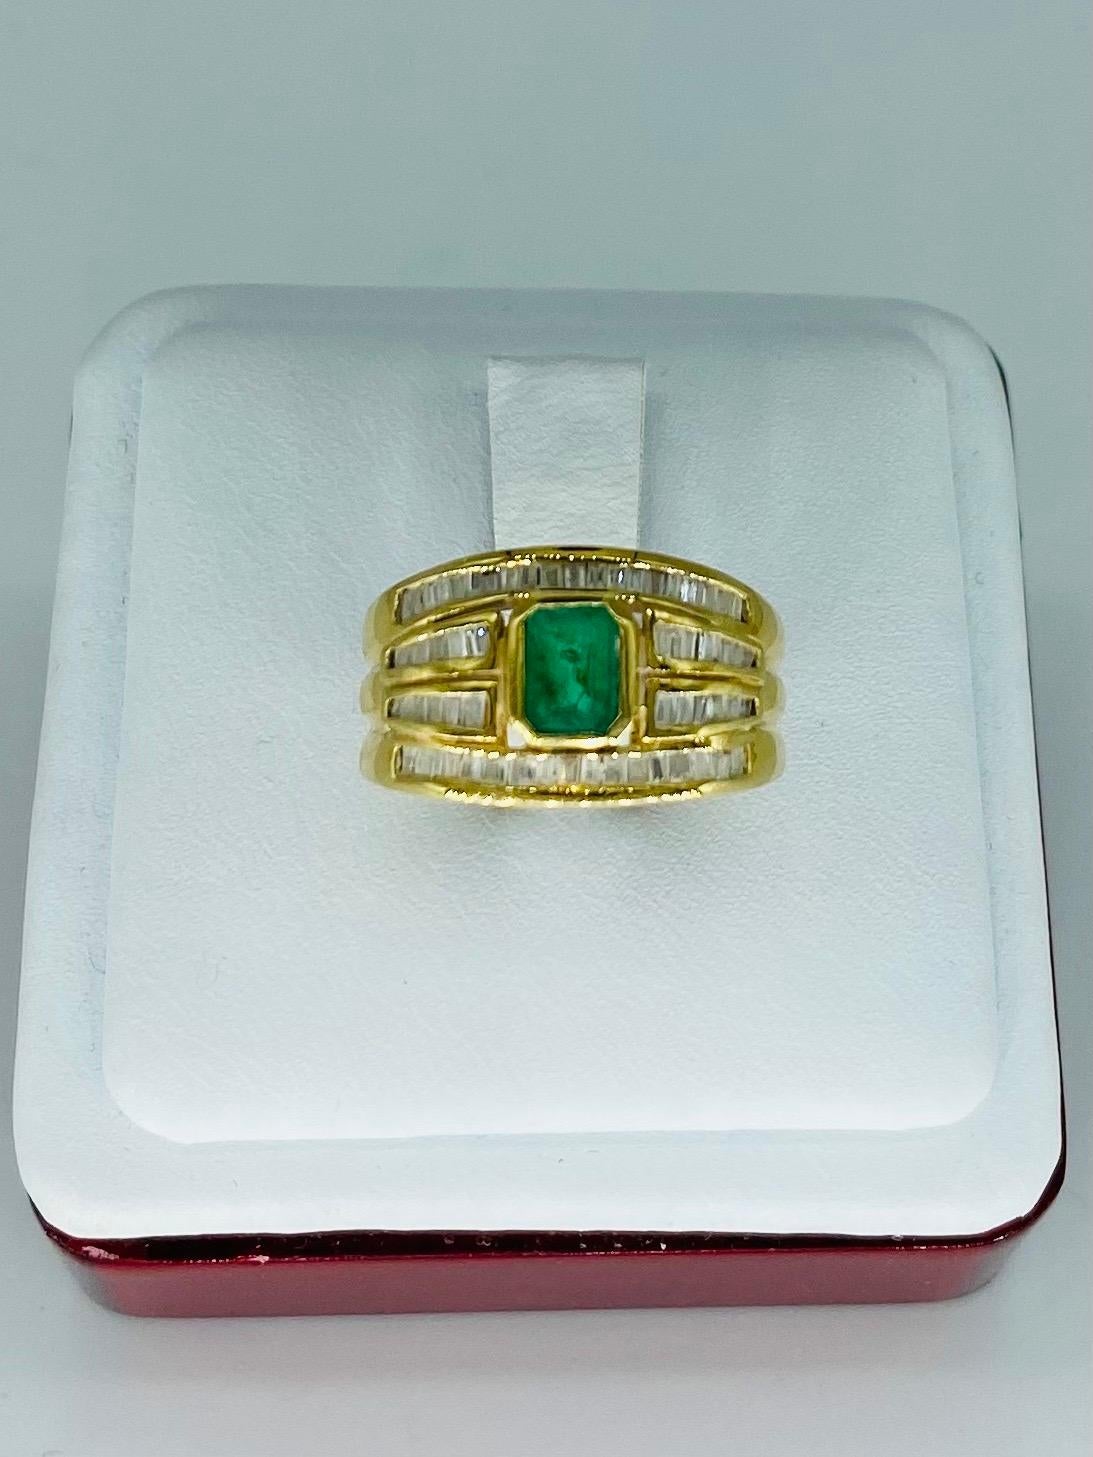 Emerald Cut Vintage 1.20 Carat Emerald and Diamonds 4-Row Ring 18k Gold For Sale